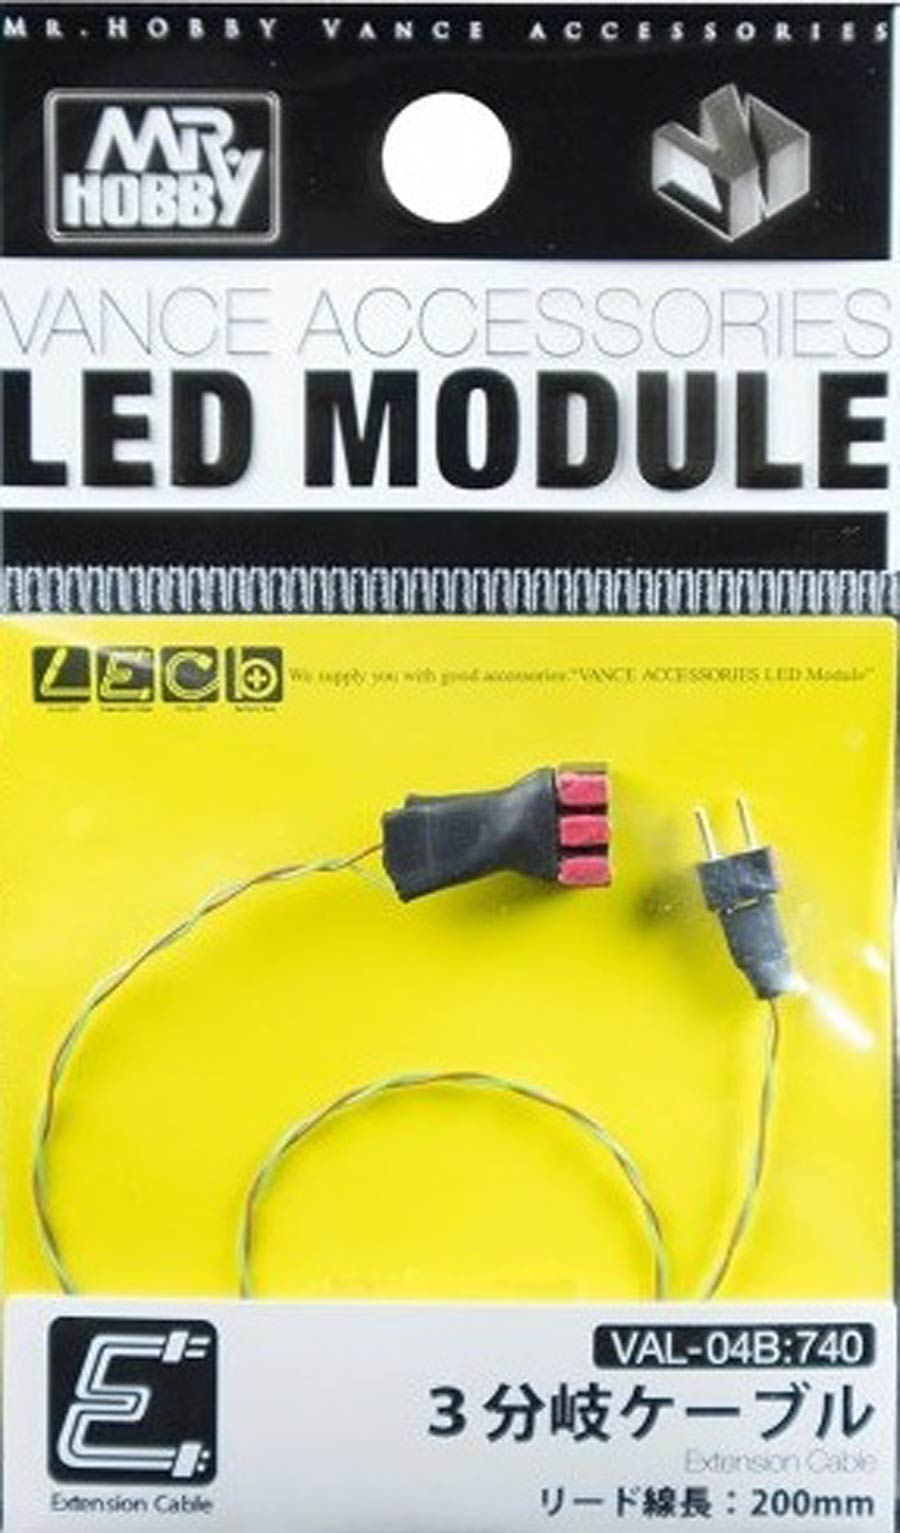 Mr. Hobby Vance Accessories LED Module -  Bag Of 10 Units - 3 Branch Extension Cable